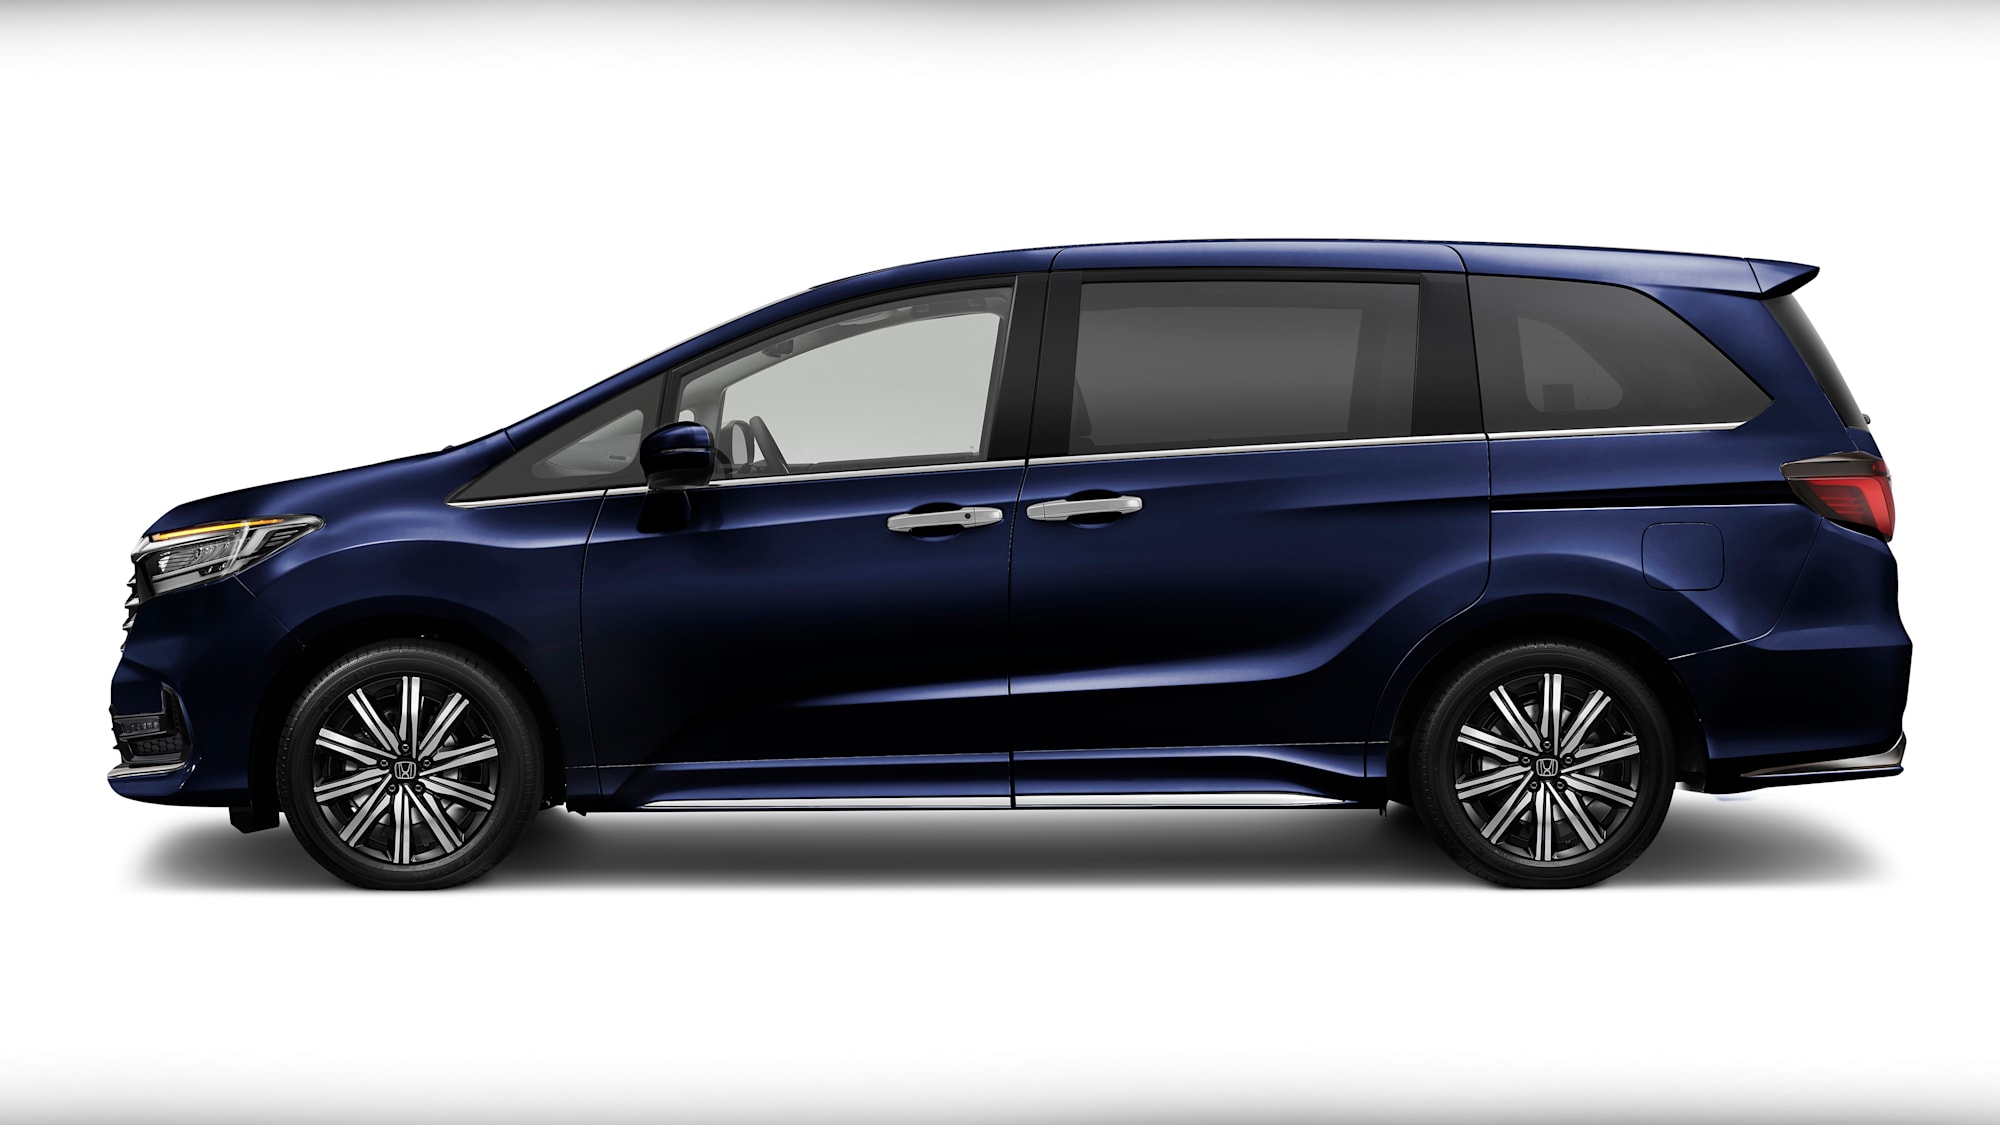 2021 Honda Odyssey price and specs: Facelifted people mover scores new